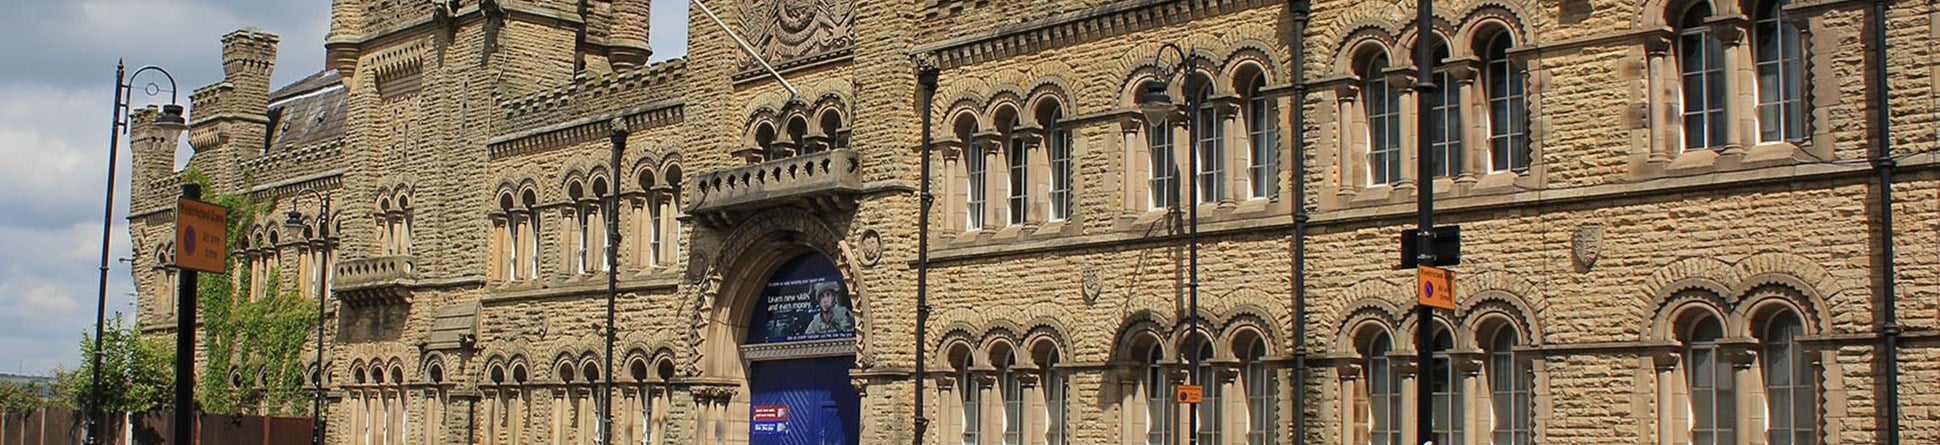 Bury, Castle Street, Drill Hall, 1868, its impressive stone–faced, gothic style frontage with crenulations was designed by Henry Styan and James Farrier, it is Grade II listed.